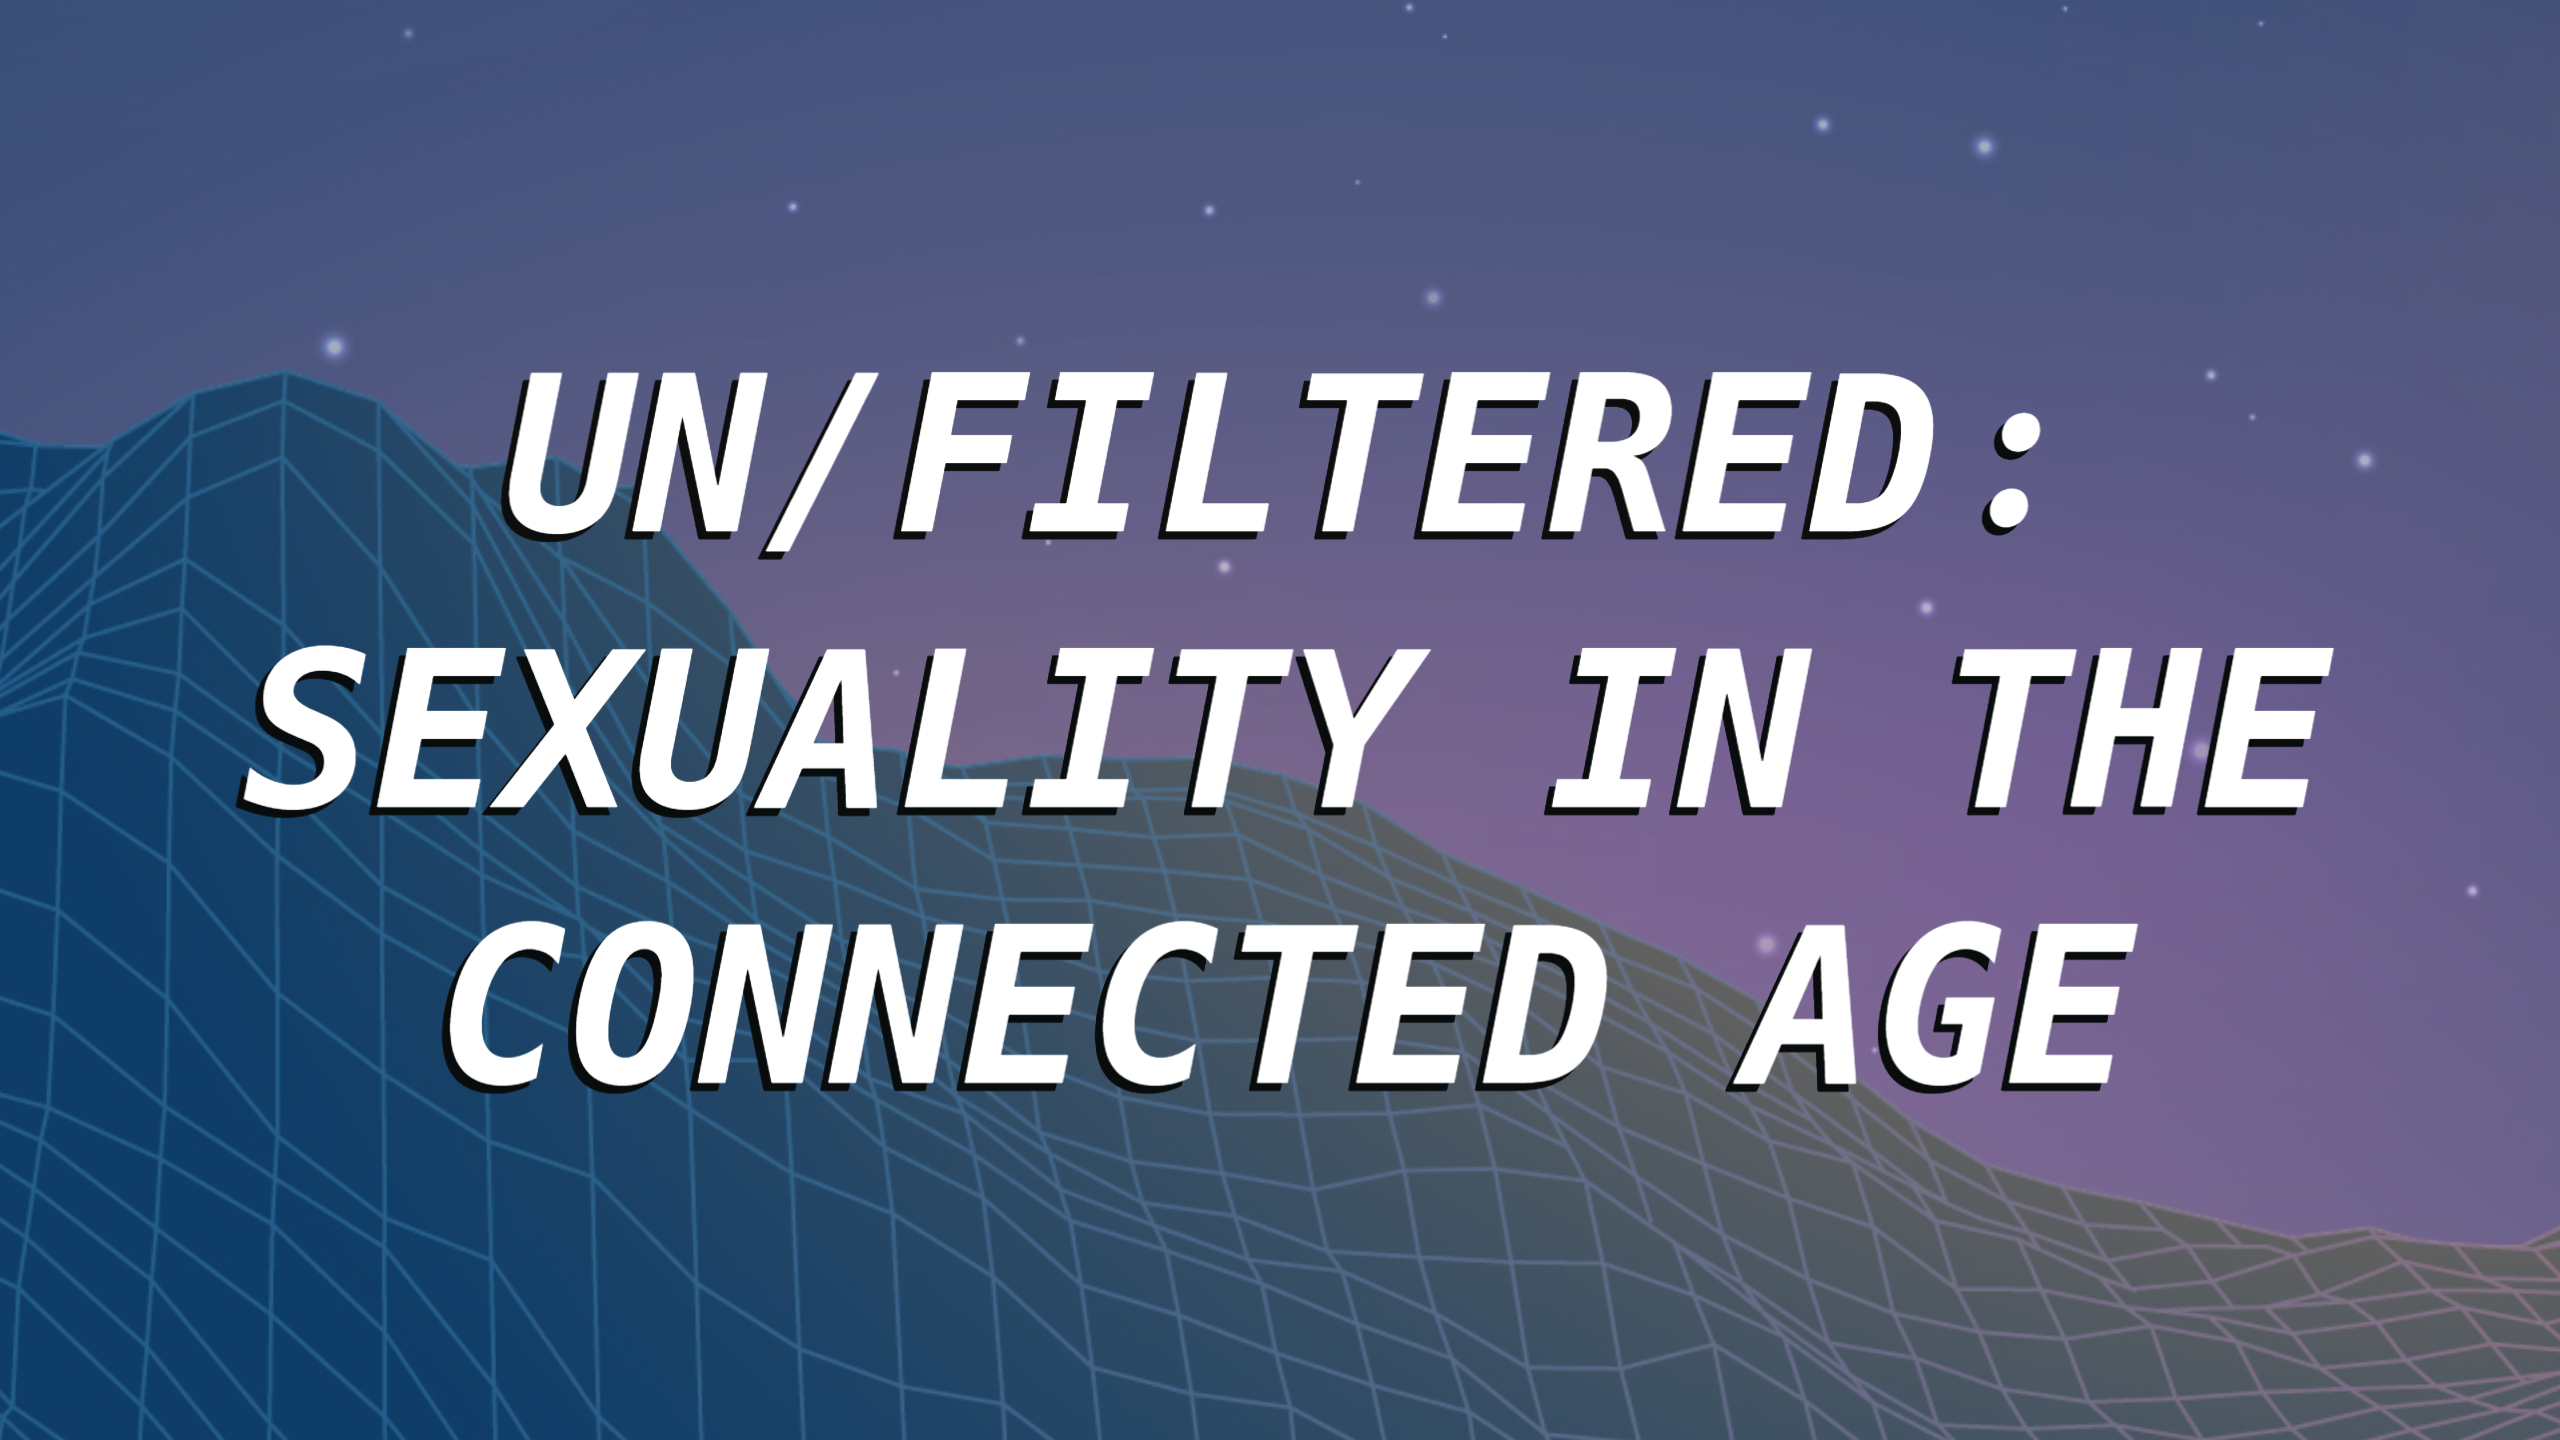 UN/FILTERED: SEXUALITY IN THE CONNECTED AGE